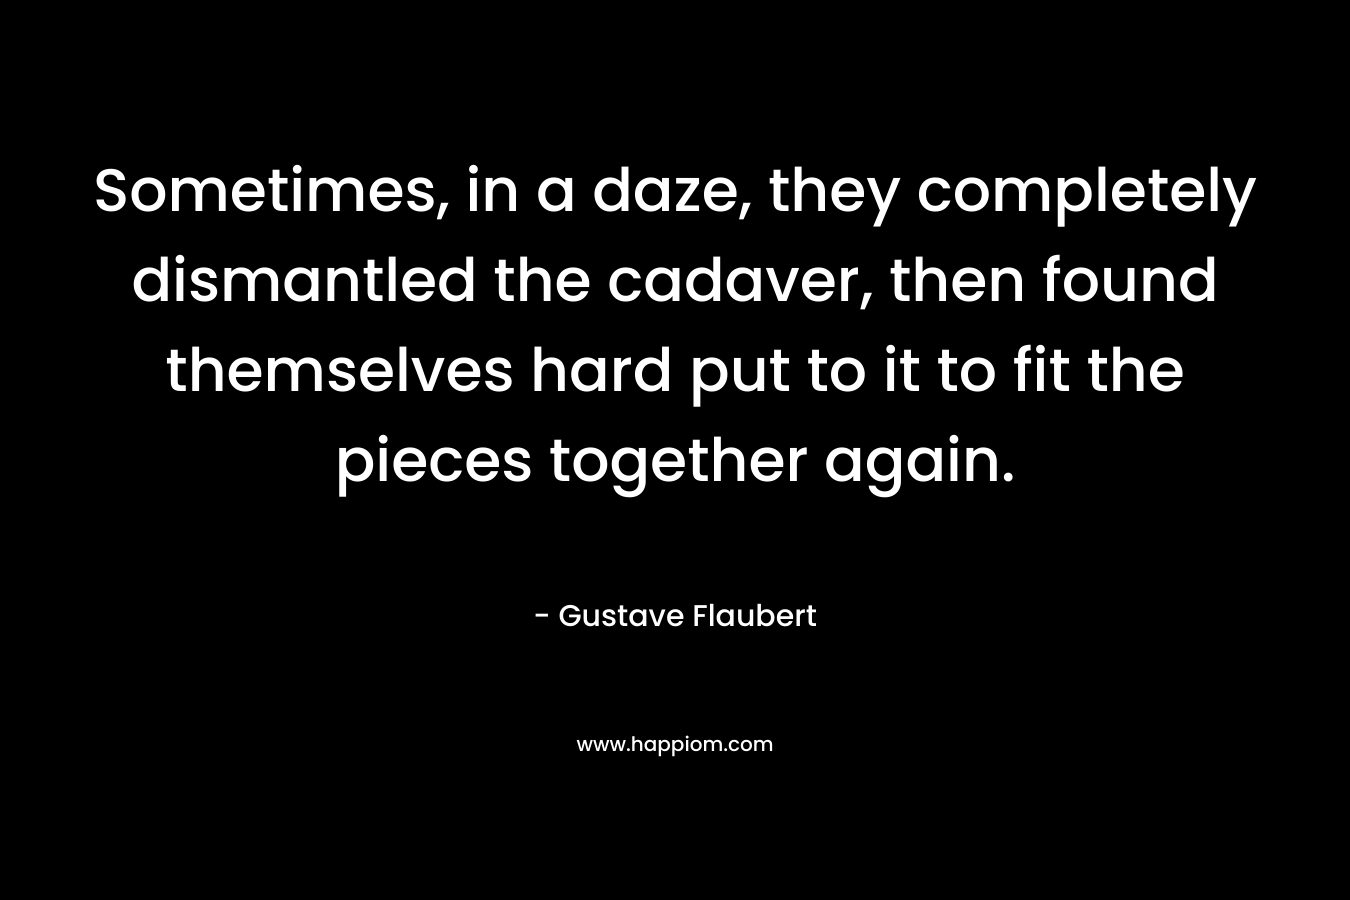 Sometimes, in a daze, they completely dismantled the cadaver, then found themselves hard put to it to fit the pieces together again. – Gustave Flaubert